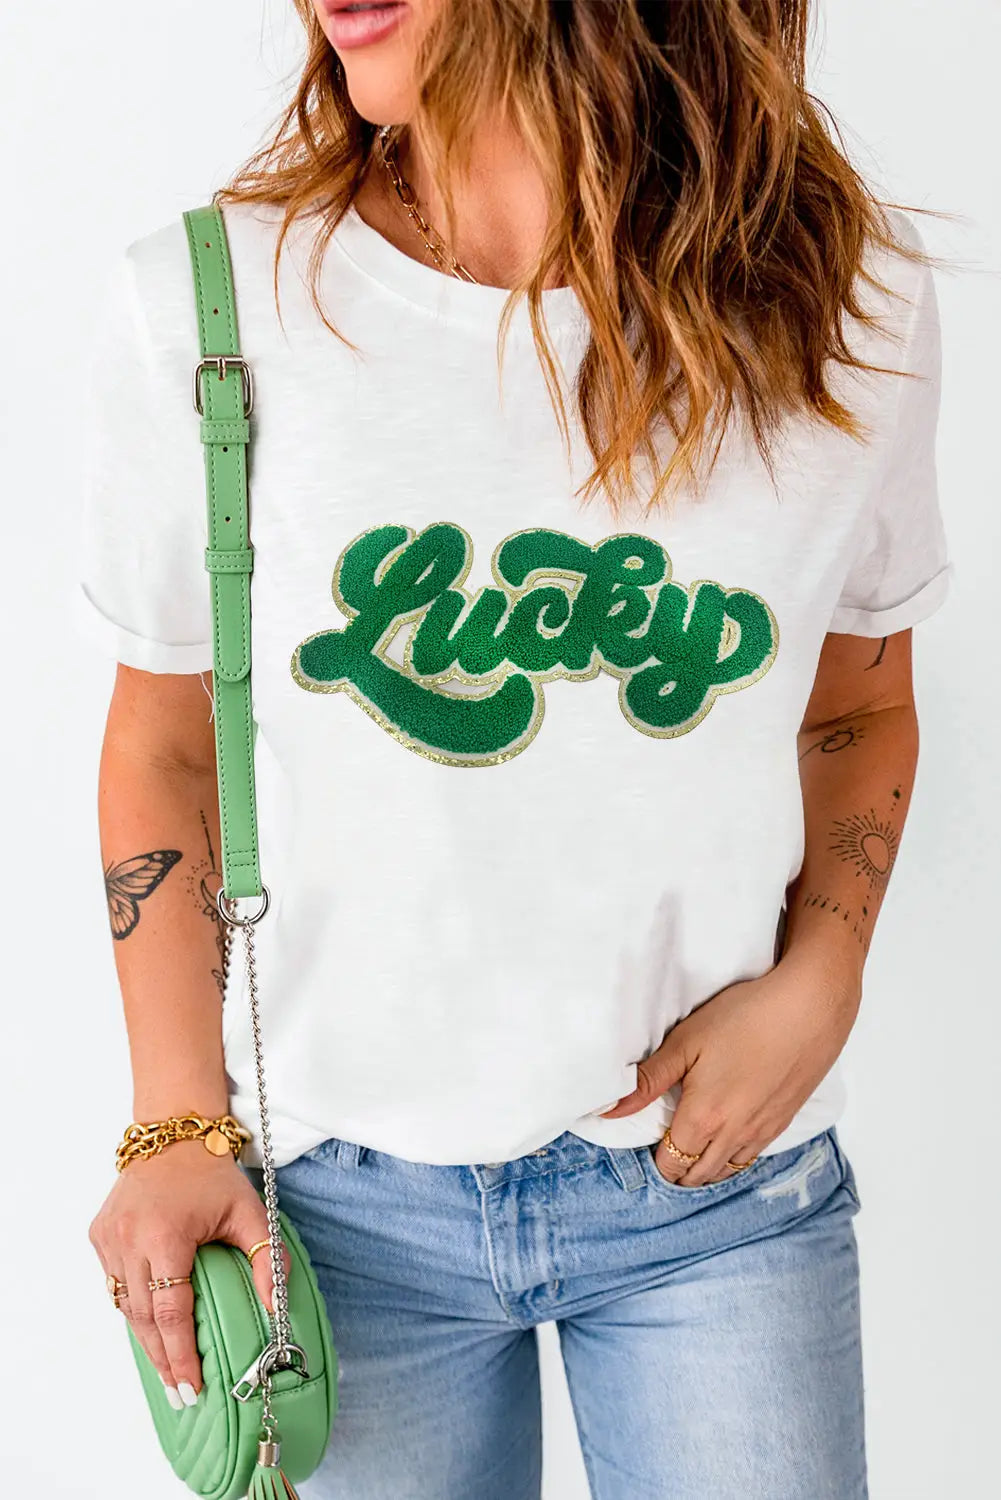 White st. Patrick lucky chenille glitter patched graphic t shirt - s 62% polyester + 32% cotton + 6% elastane t - shirts